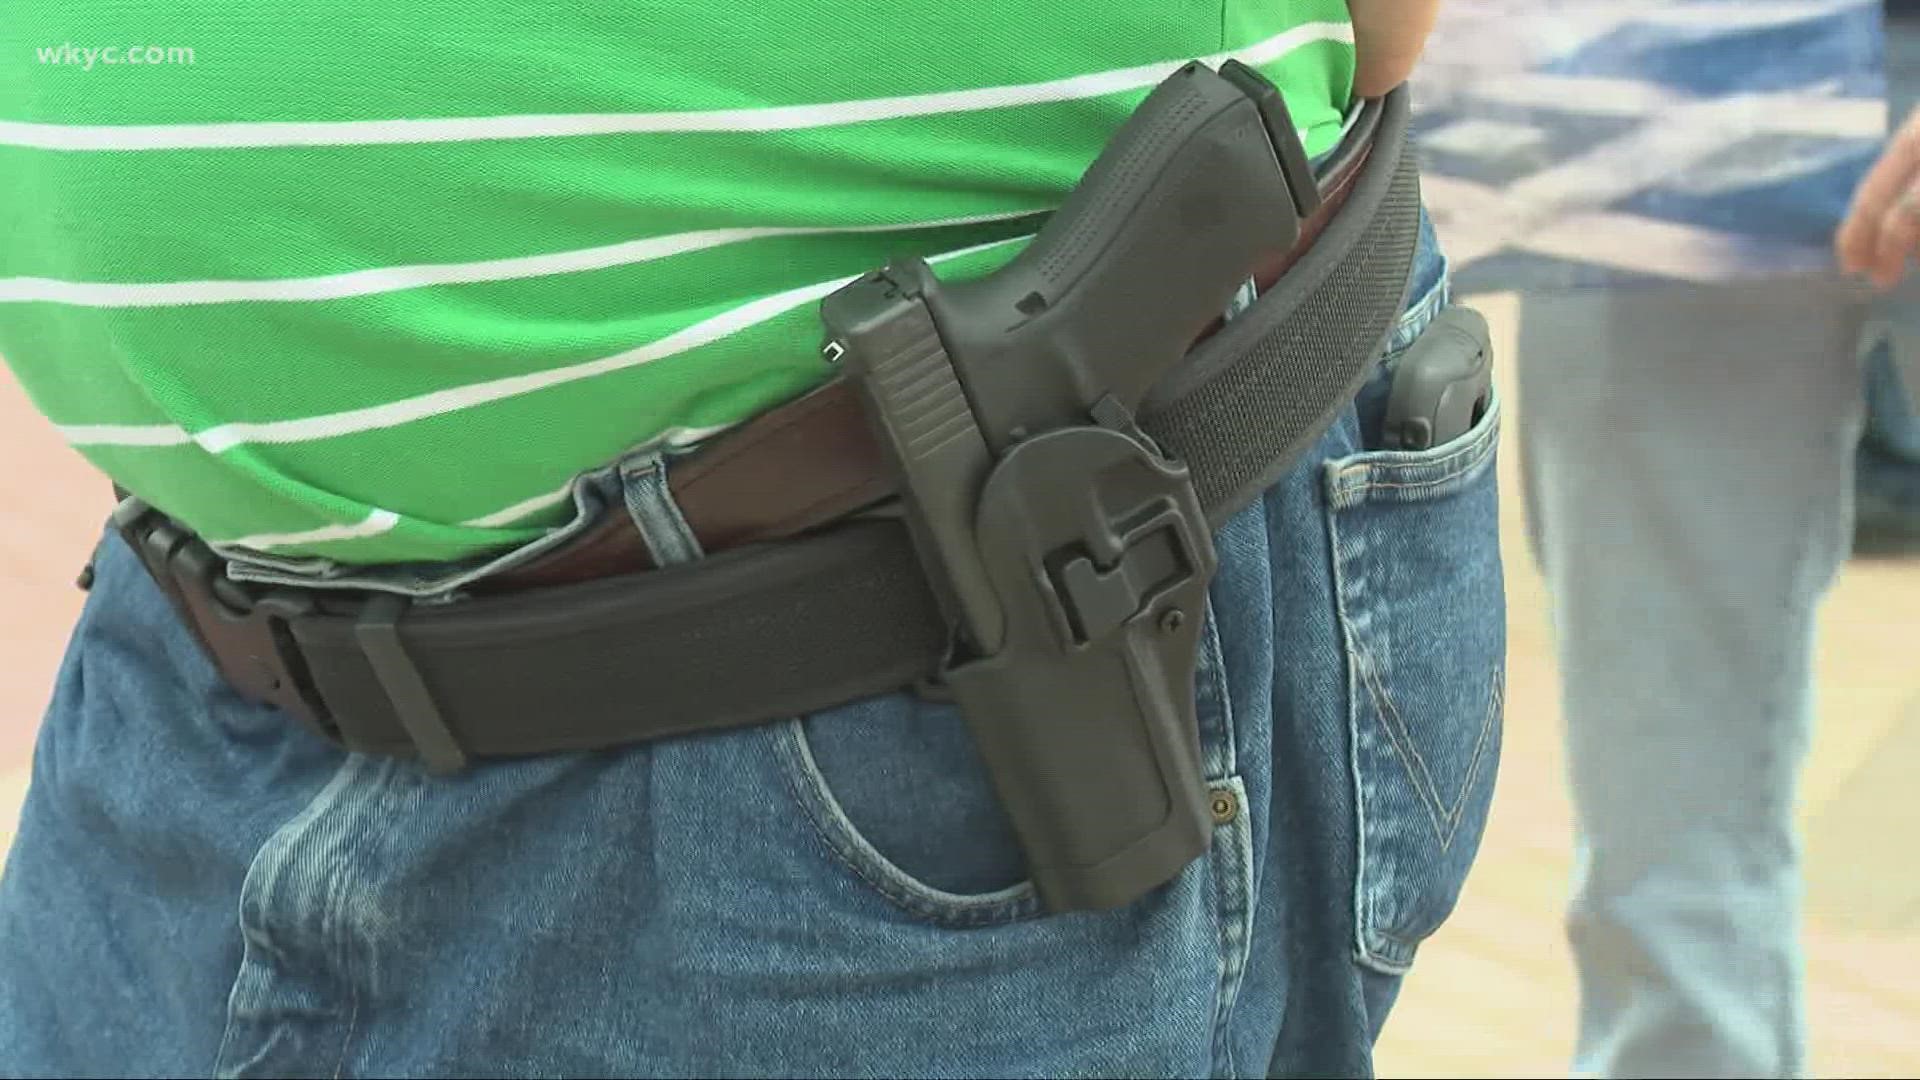 The bill allows those 21 and older who can legally own a gun to carry it concealed with no training or license. It now heads to Gov. Mike DeWine's desk.